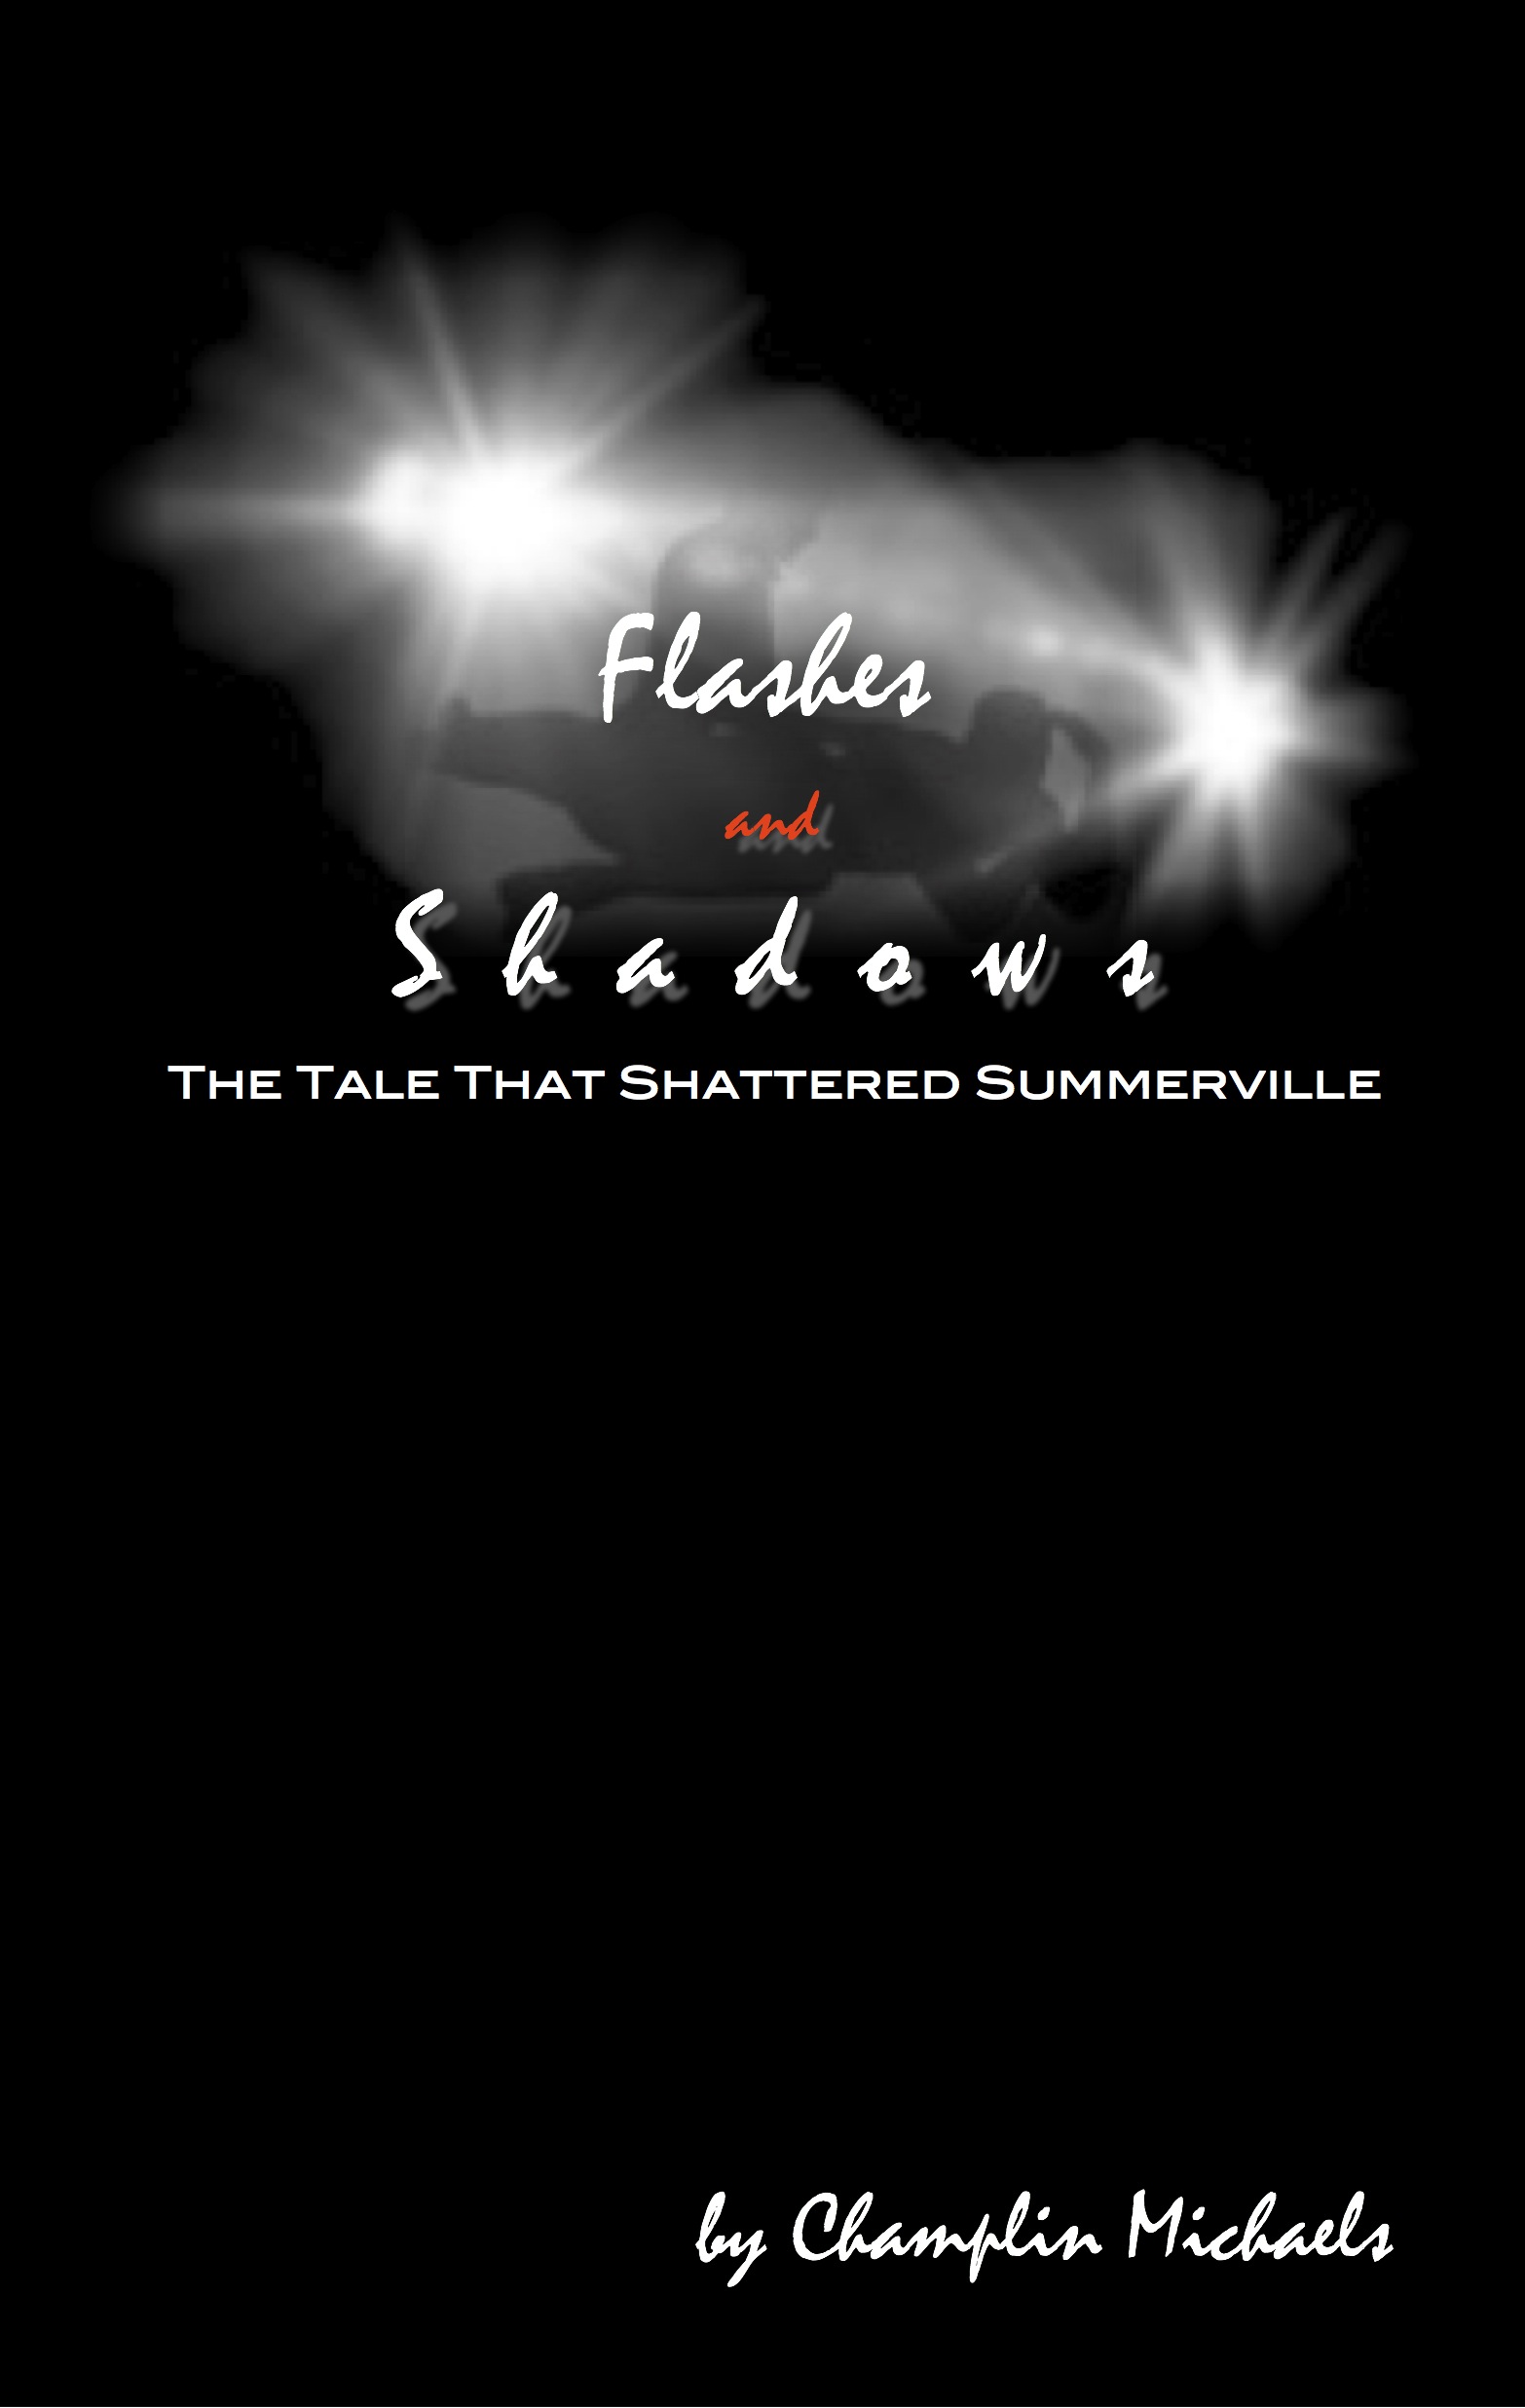 Flashes and Shadows: The Tale That Shattered Summerville